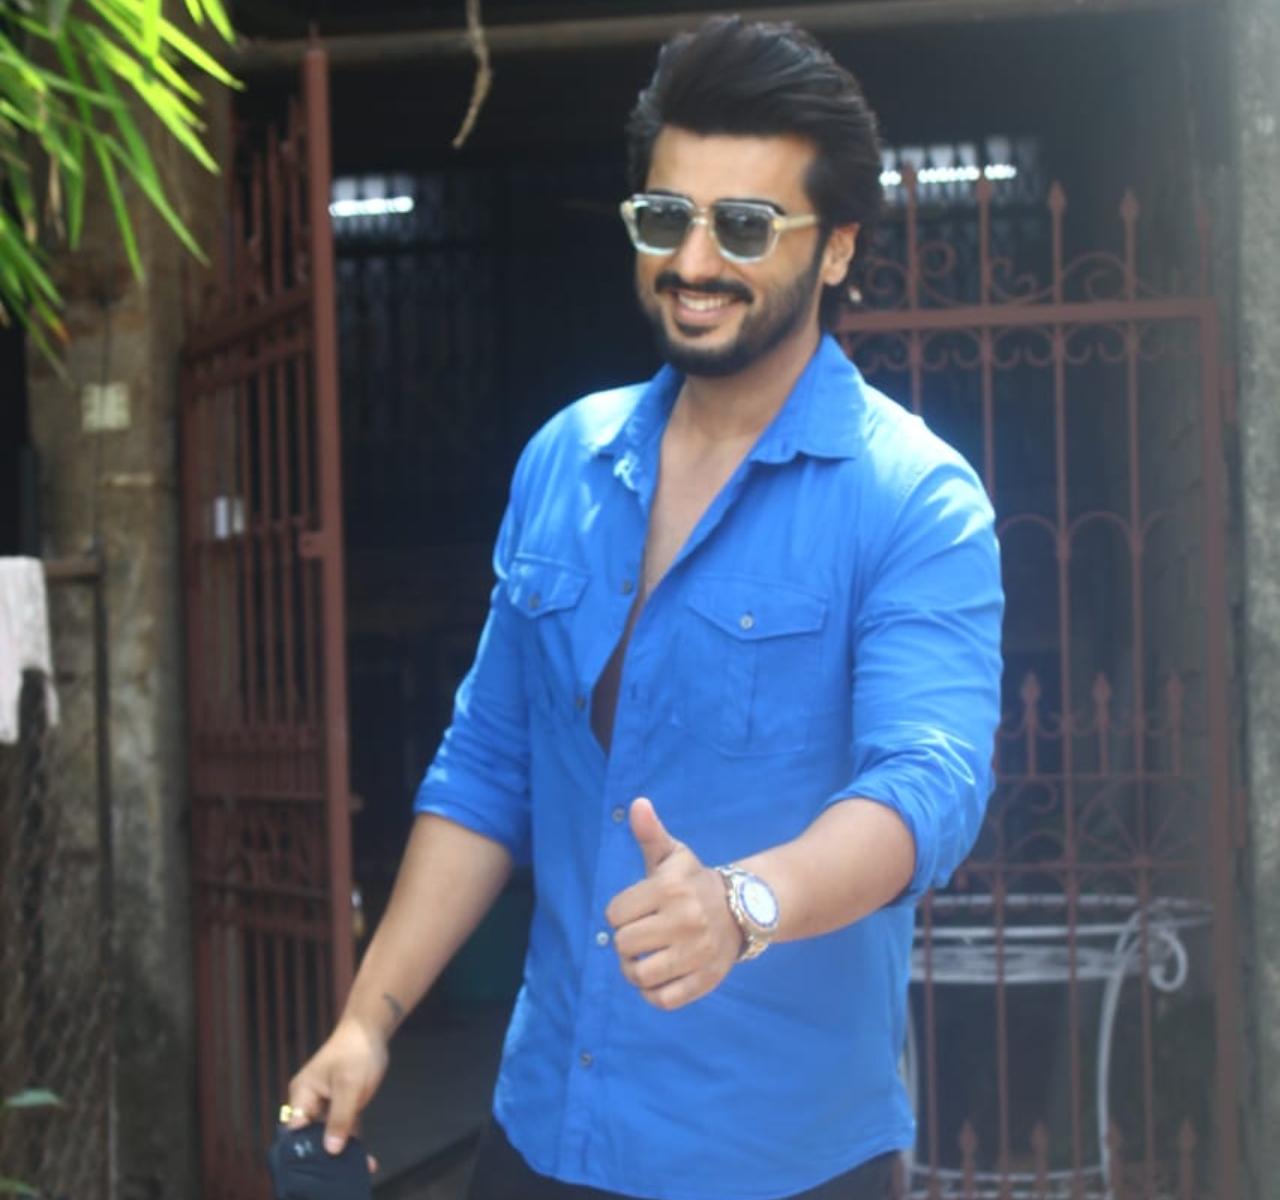 Arjun Kapoor happily posed for the photographers in Juhu. On the work front, the actor will be next seen in Bhoot Police opposite Arjun Kapoor, Jacqueline Fernandez and Saif Ali Khan.